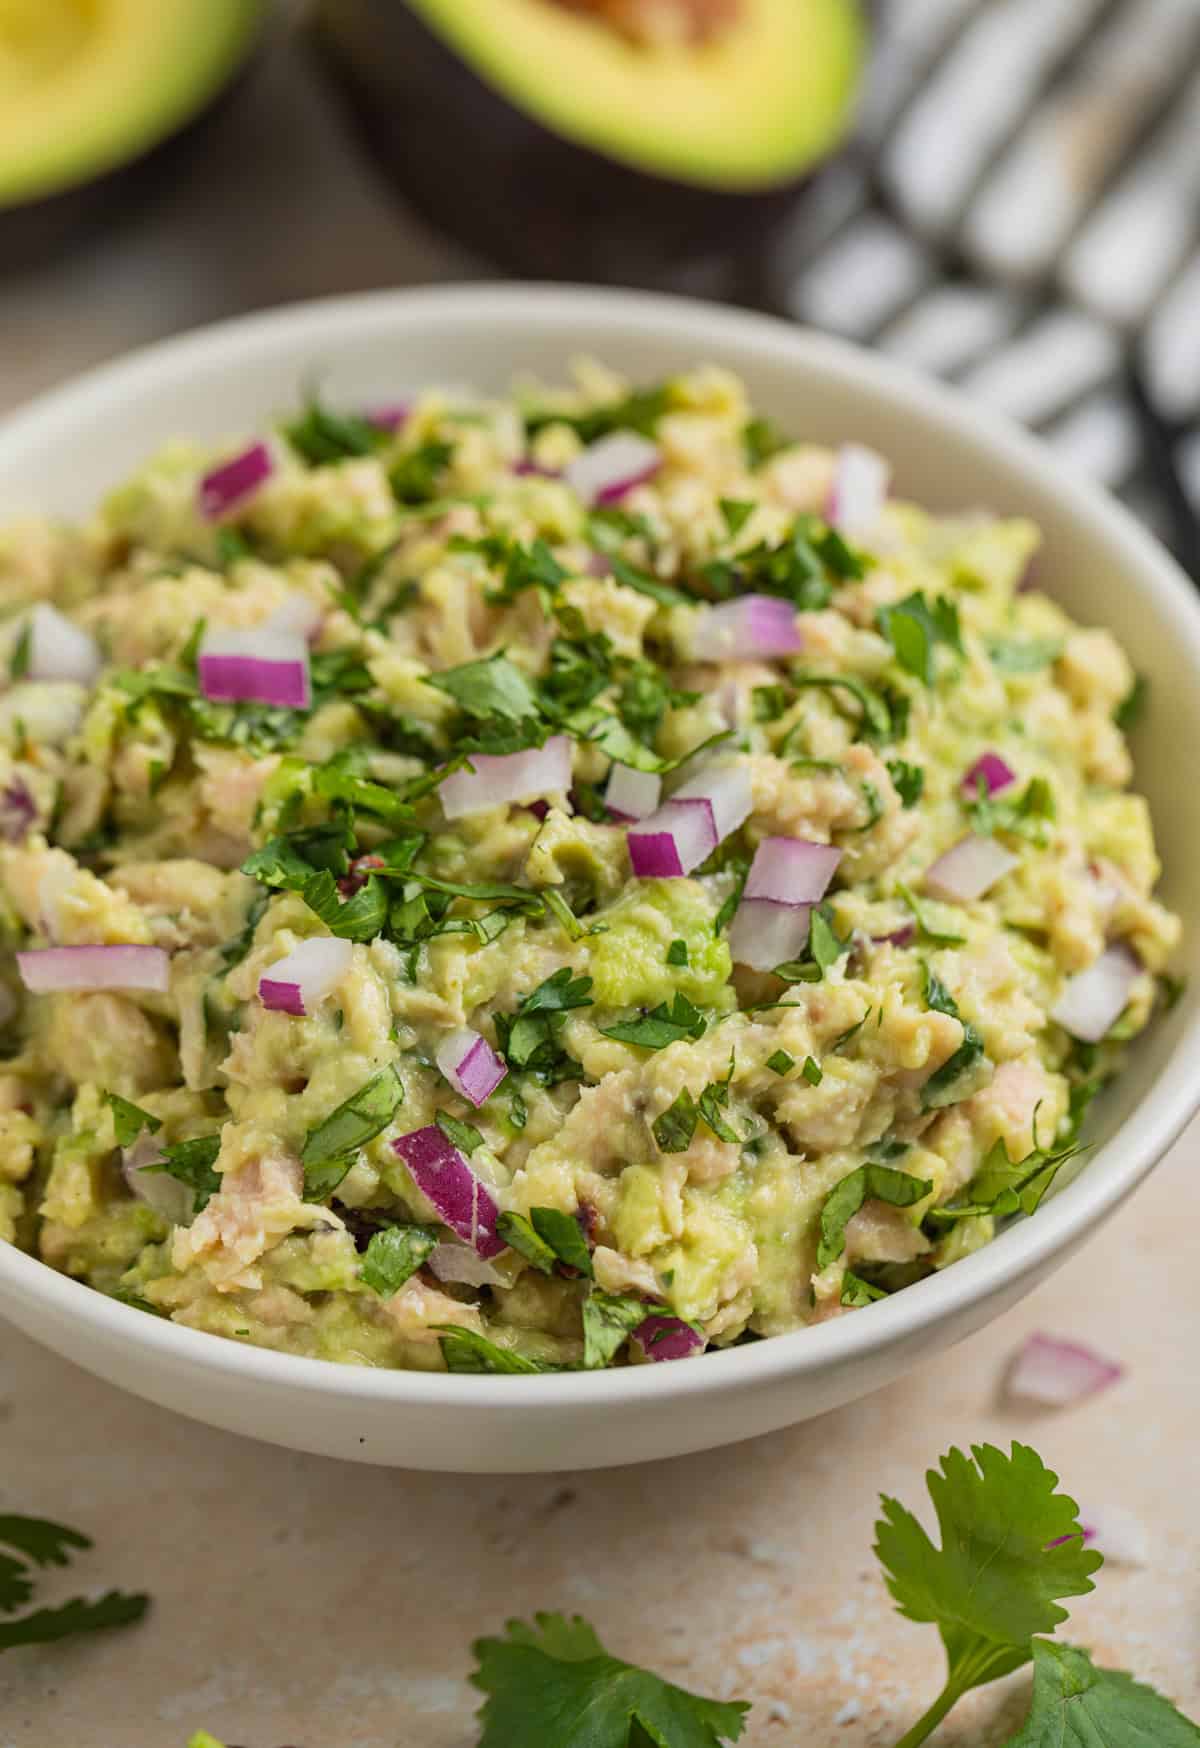 Avocado tuna salad in bowl topped with chopped cilantro and diced red onion.